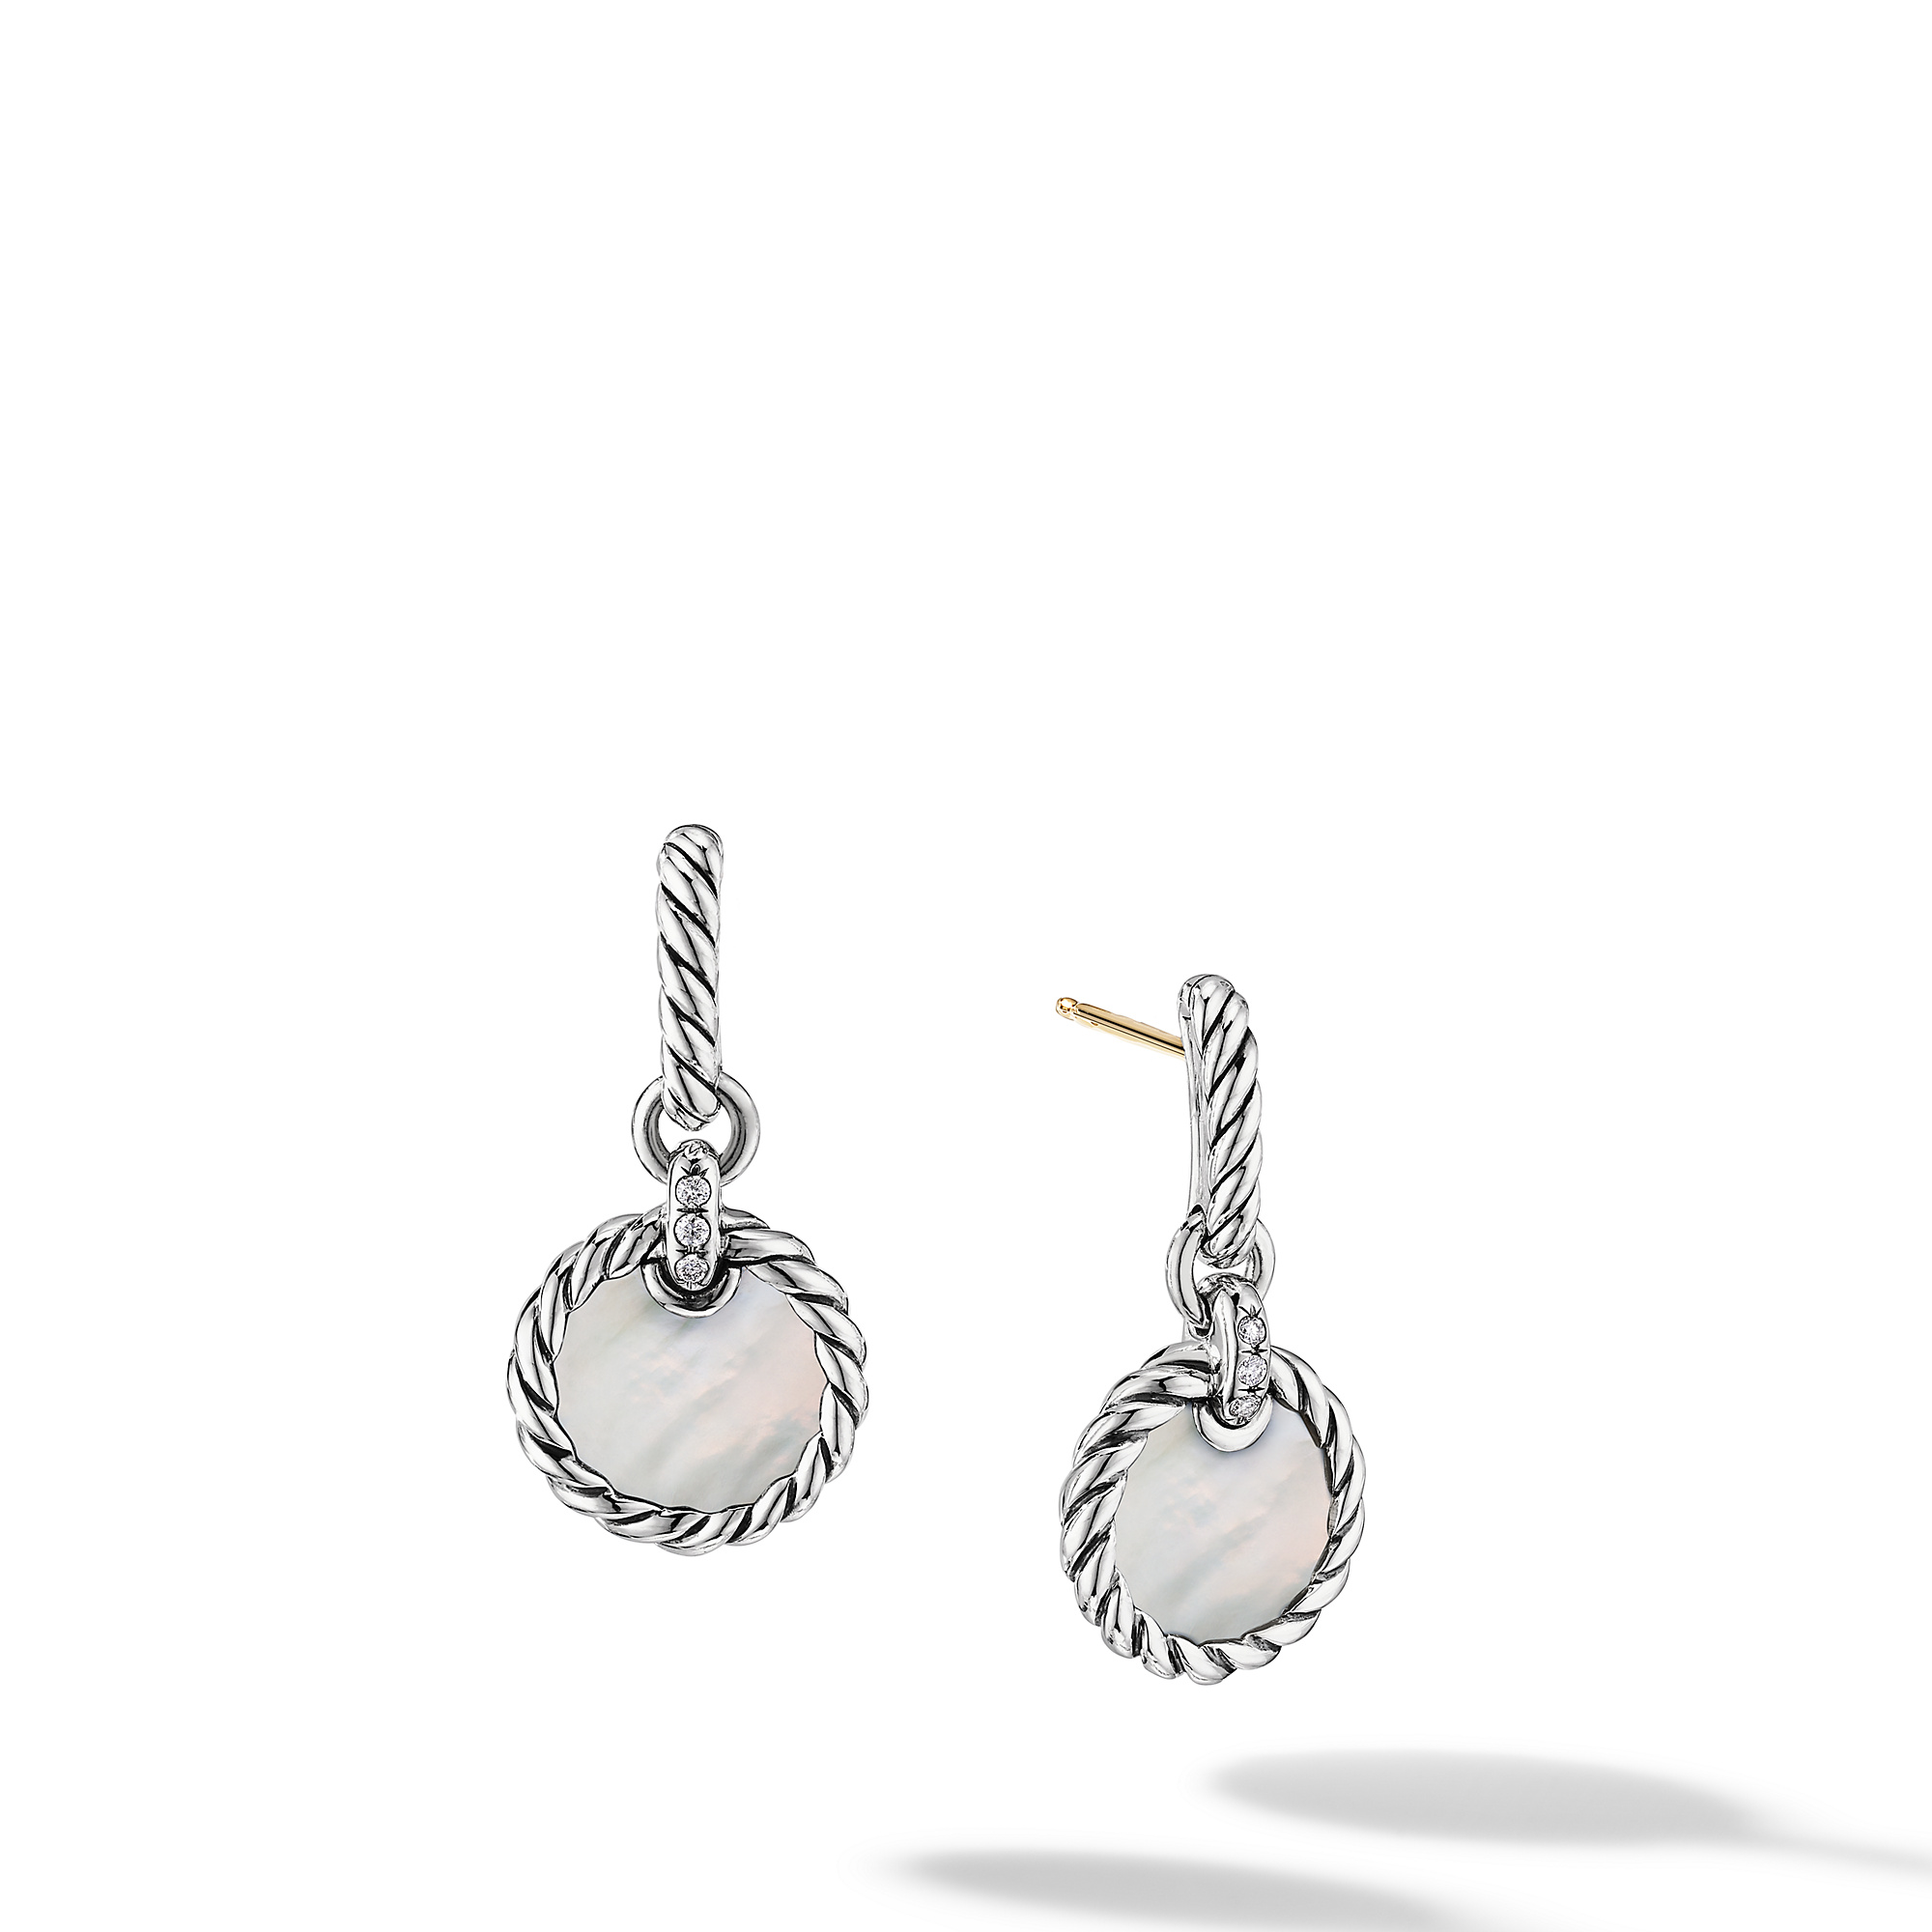 DY Elements® Drop Earrings in Sterling Silver with Mother of Pearl and Pave Diamonds